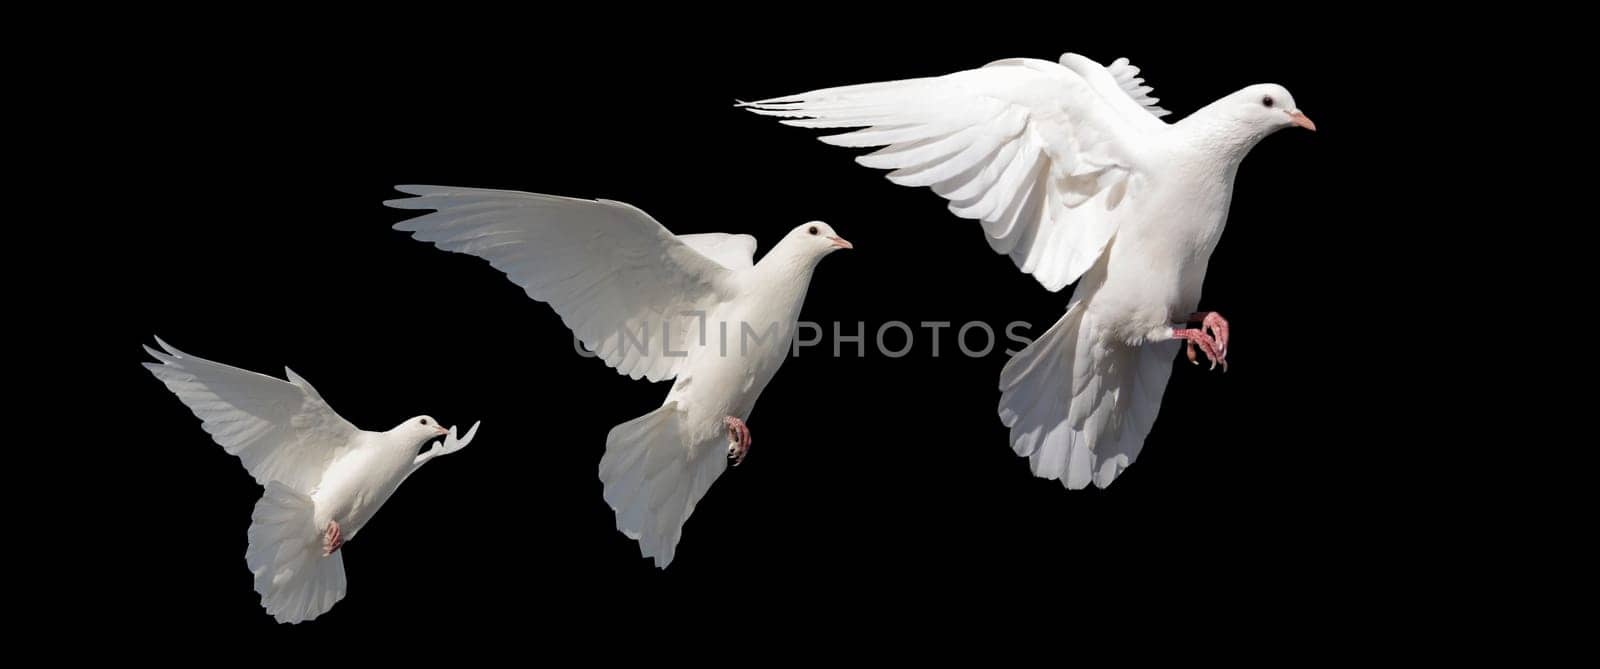 white doves, birds of peace in flight isolated on a black background, world peace